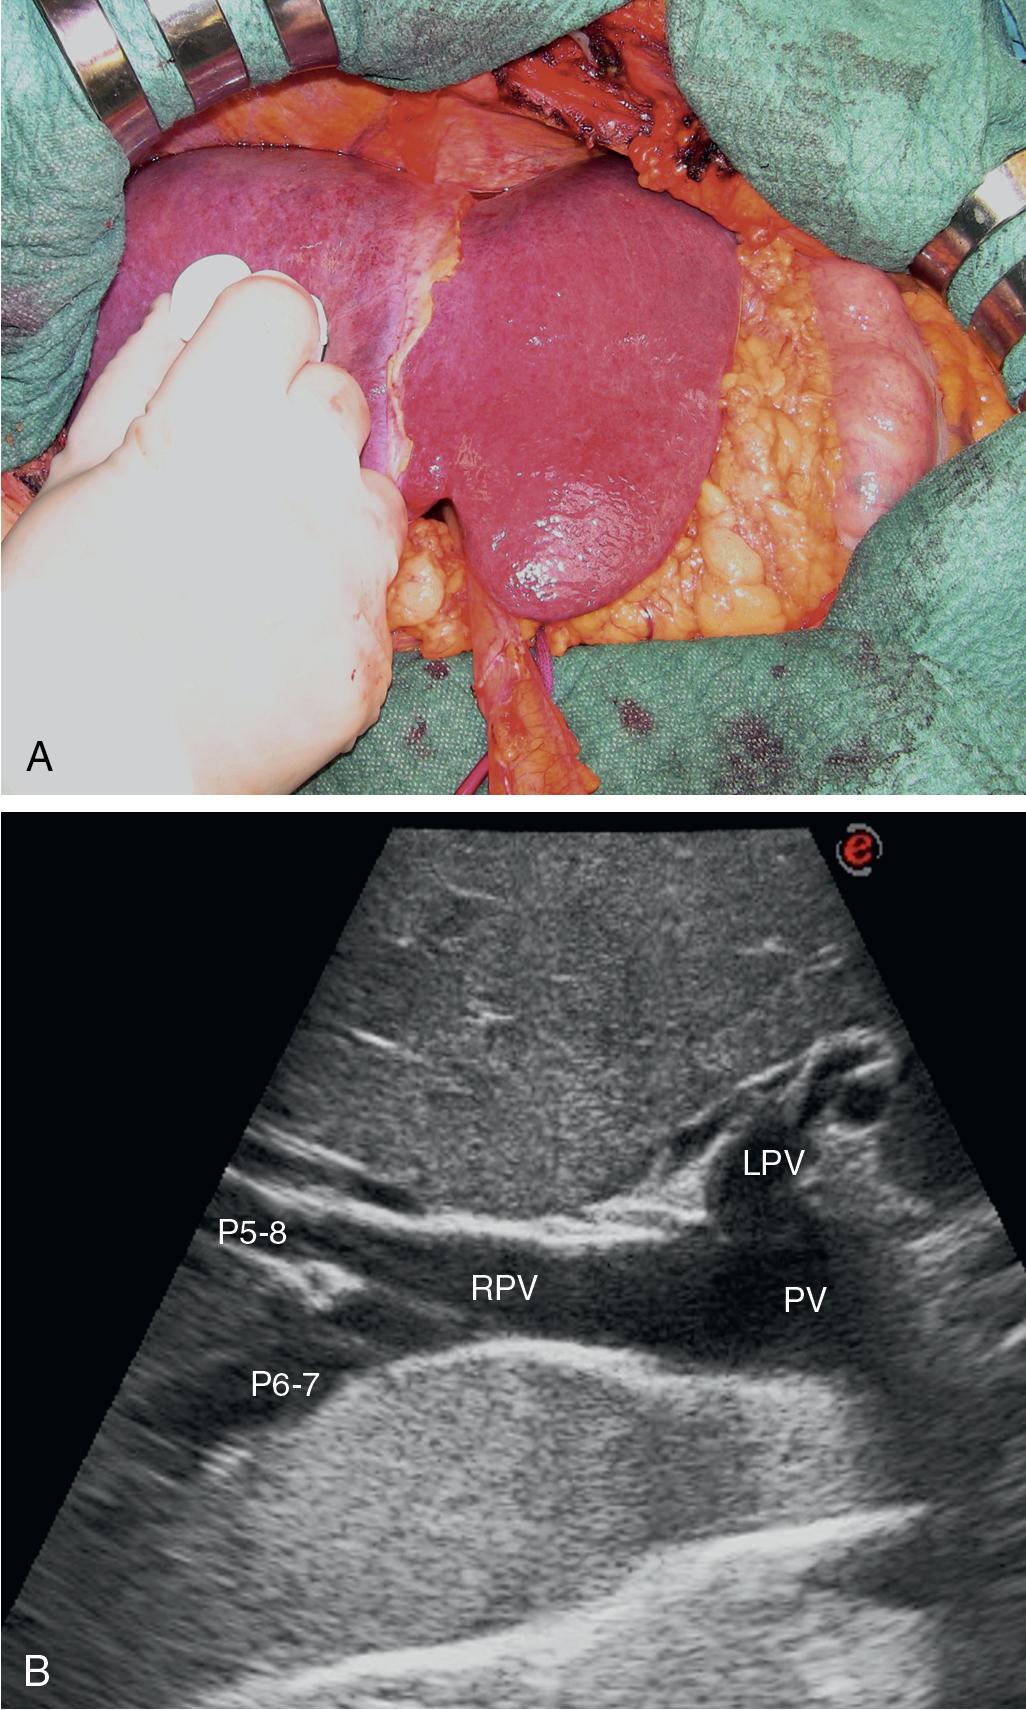 FIGURE 103.9, A, Liver exposed for initial exploration, once the falciform ligament has been cut; the surgeon is handling a probe. B , Typical branching pattern of the portal branches with the portal branch to right anterior section (P5-8) and to the right posterior section (P6-7) originating from the right portal vein (RPV). LPV , Left portal vein; PV, portal vein.